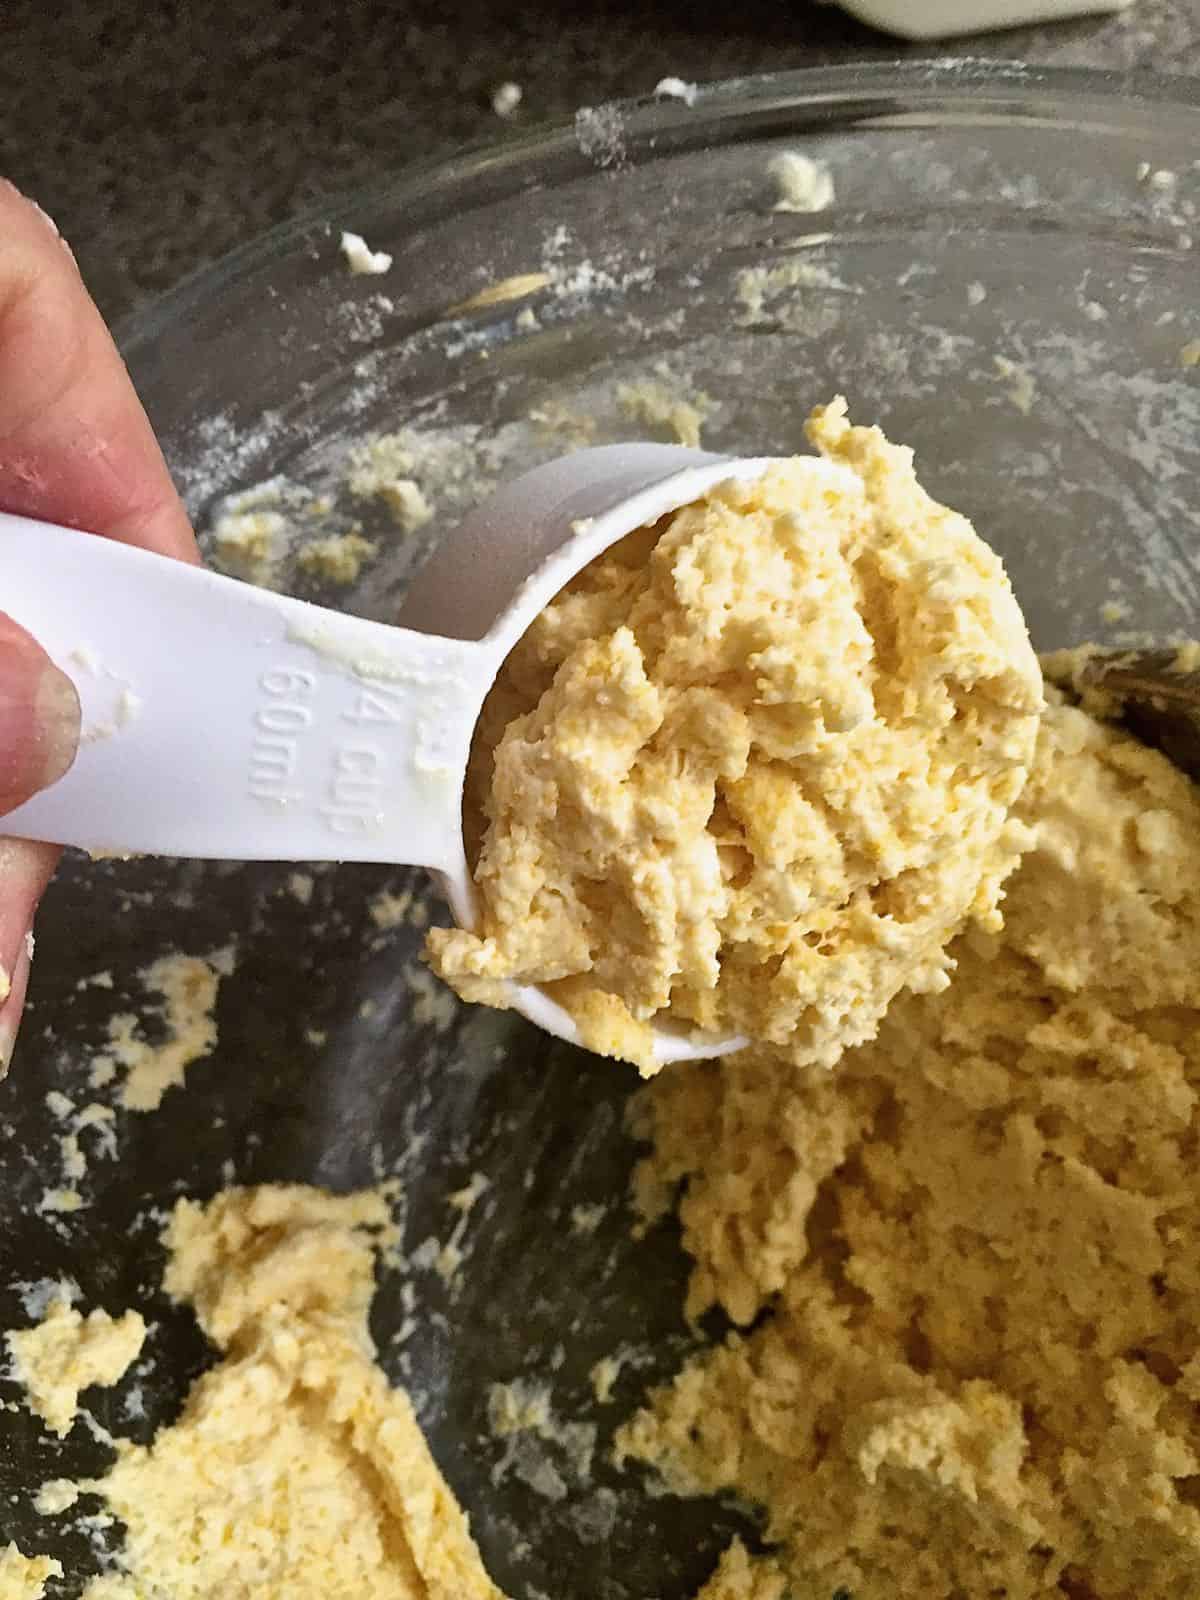 A measuring cup with biscuit dough to make drop biscuits.